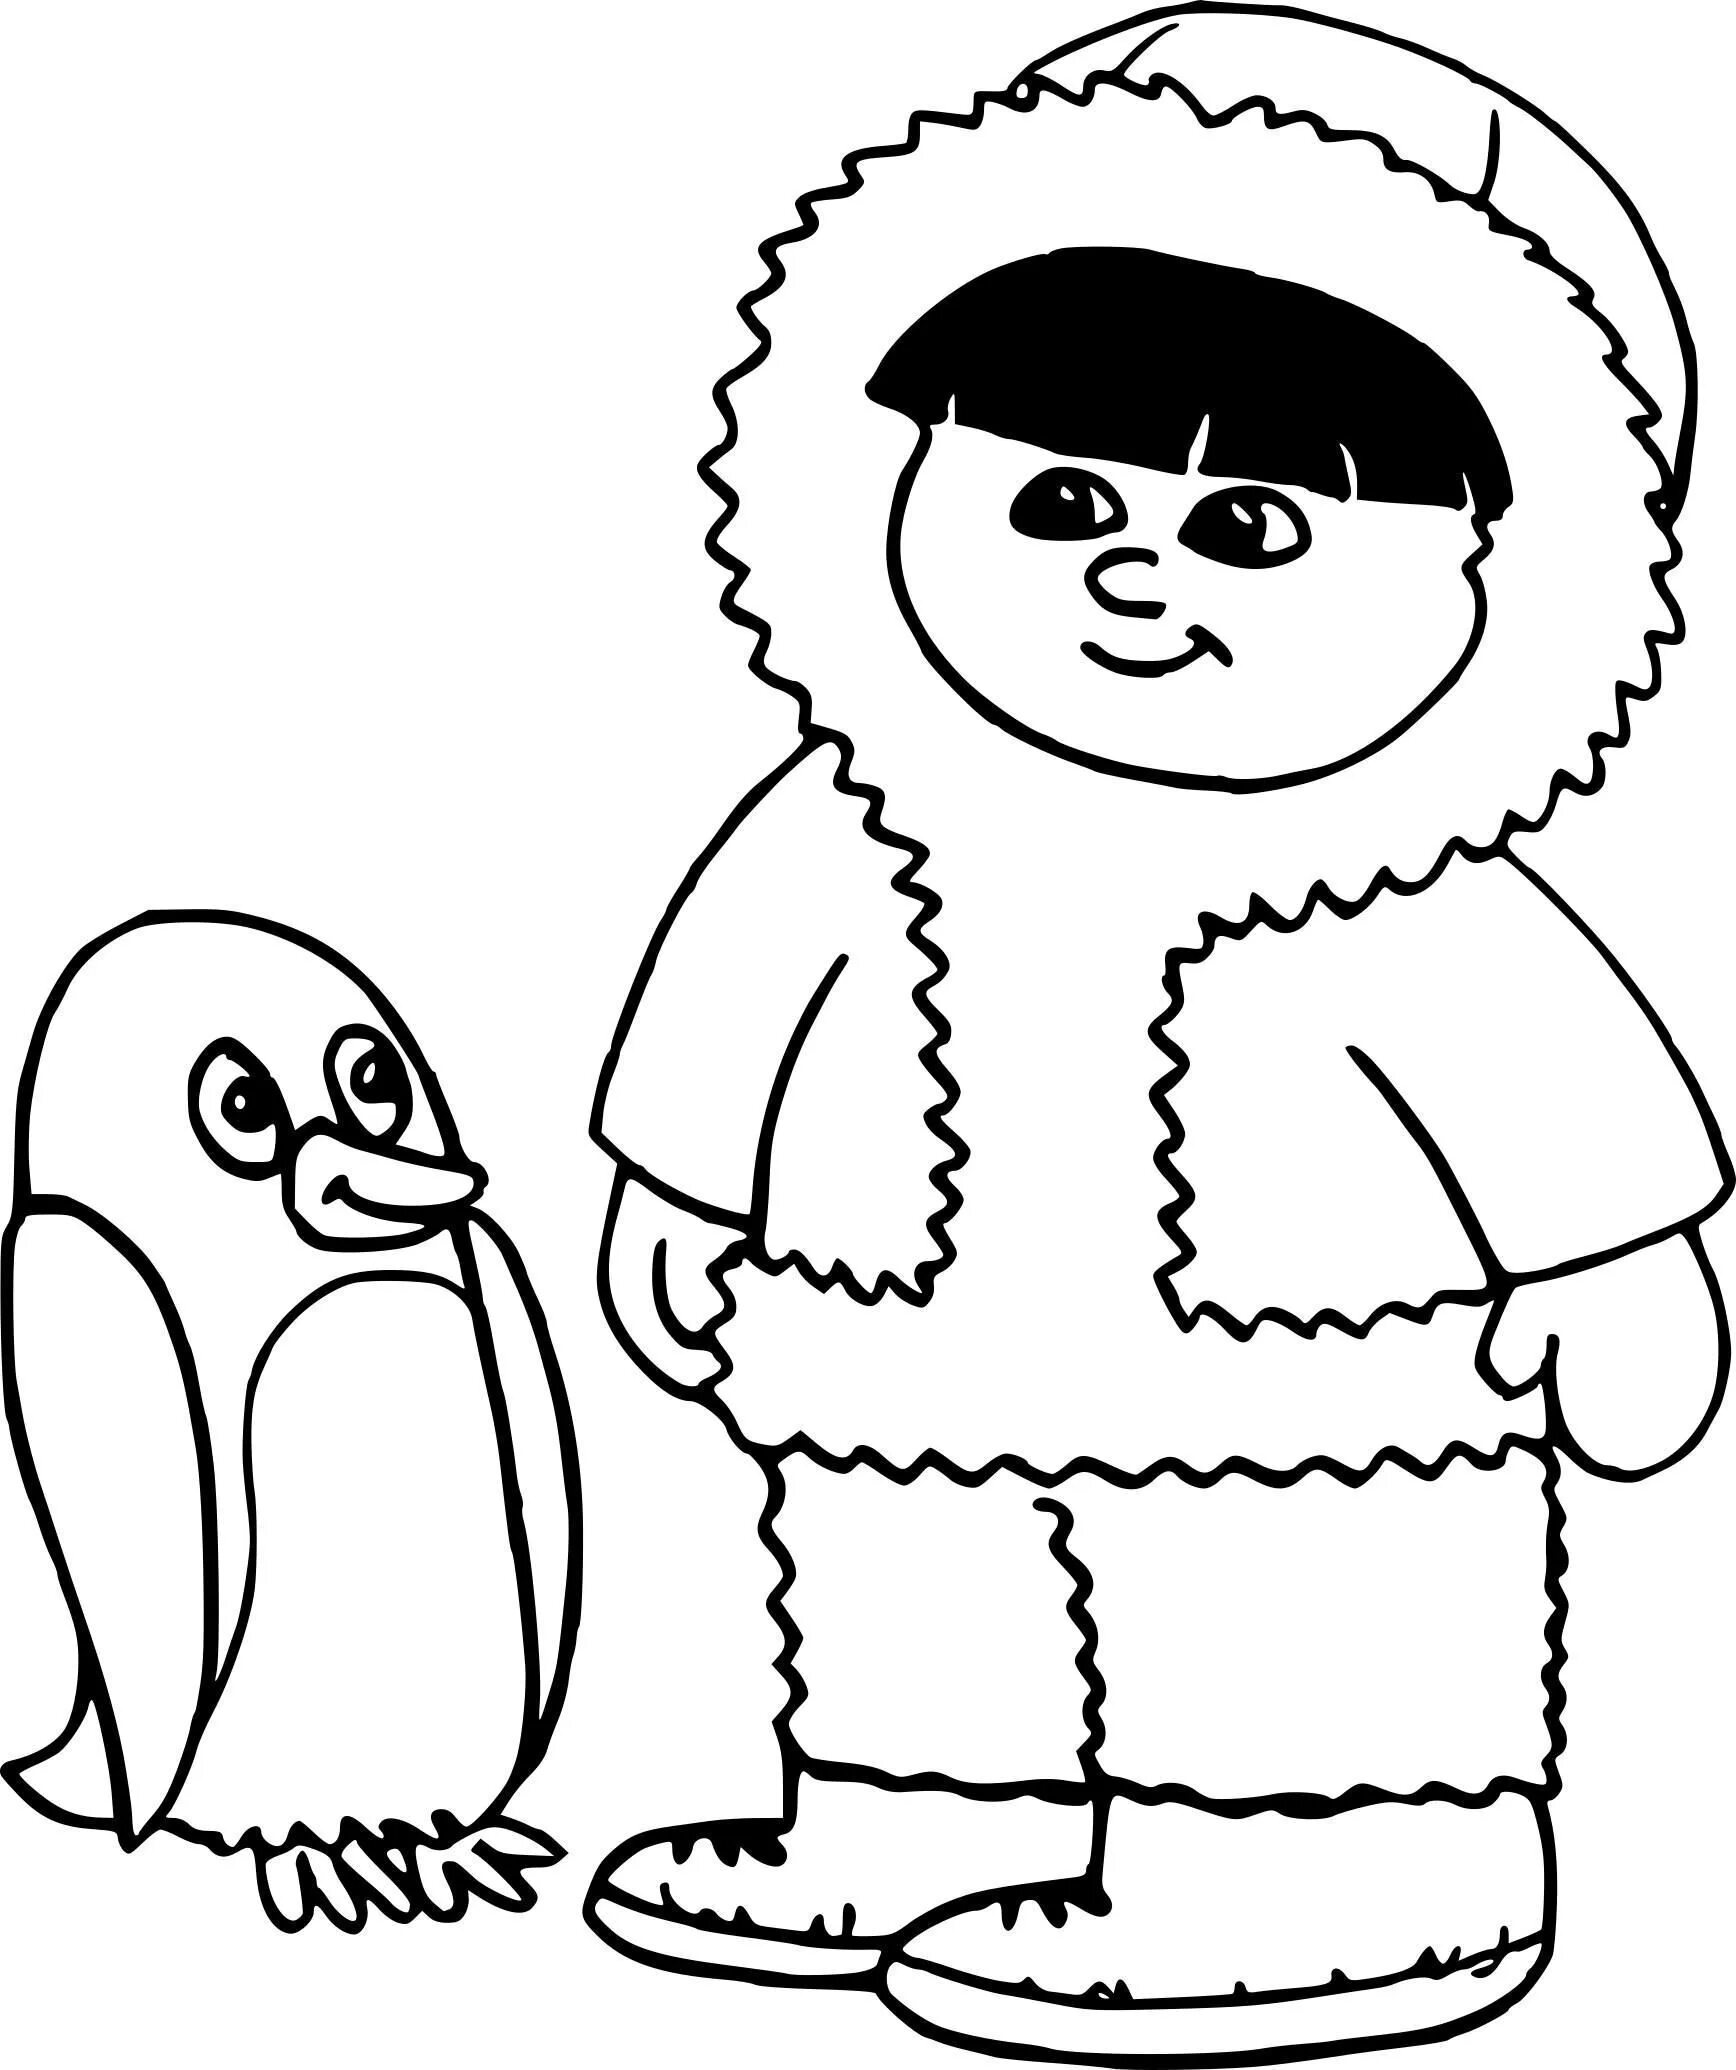 Provocative Chukchi coloring book for kids